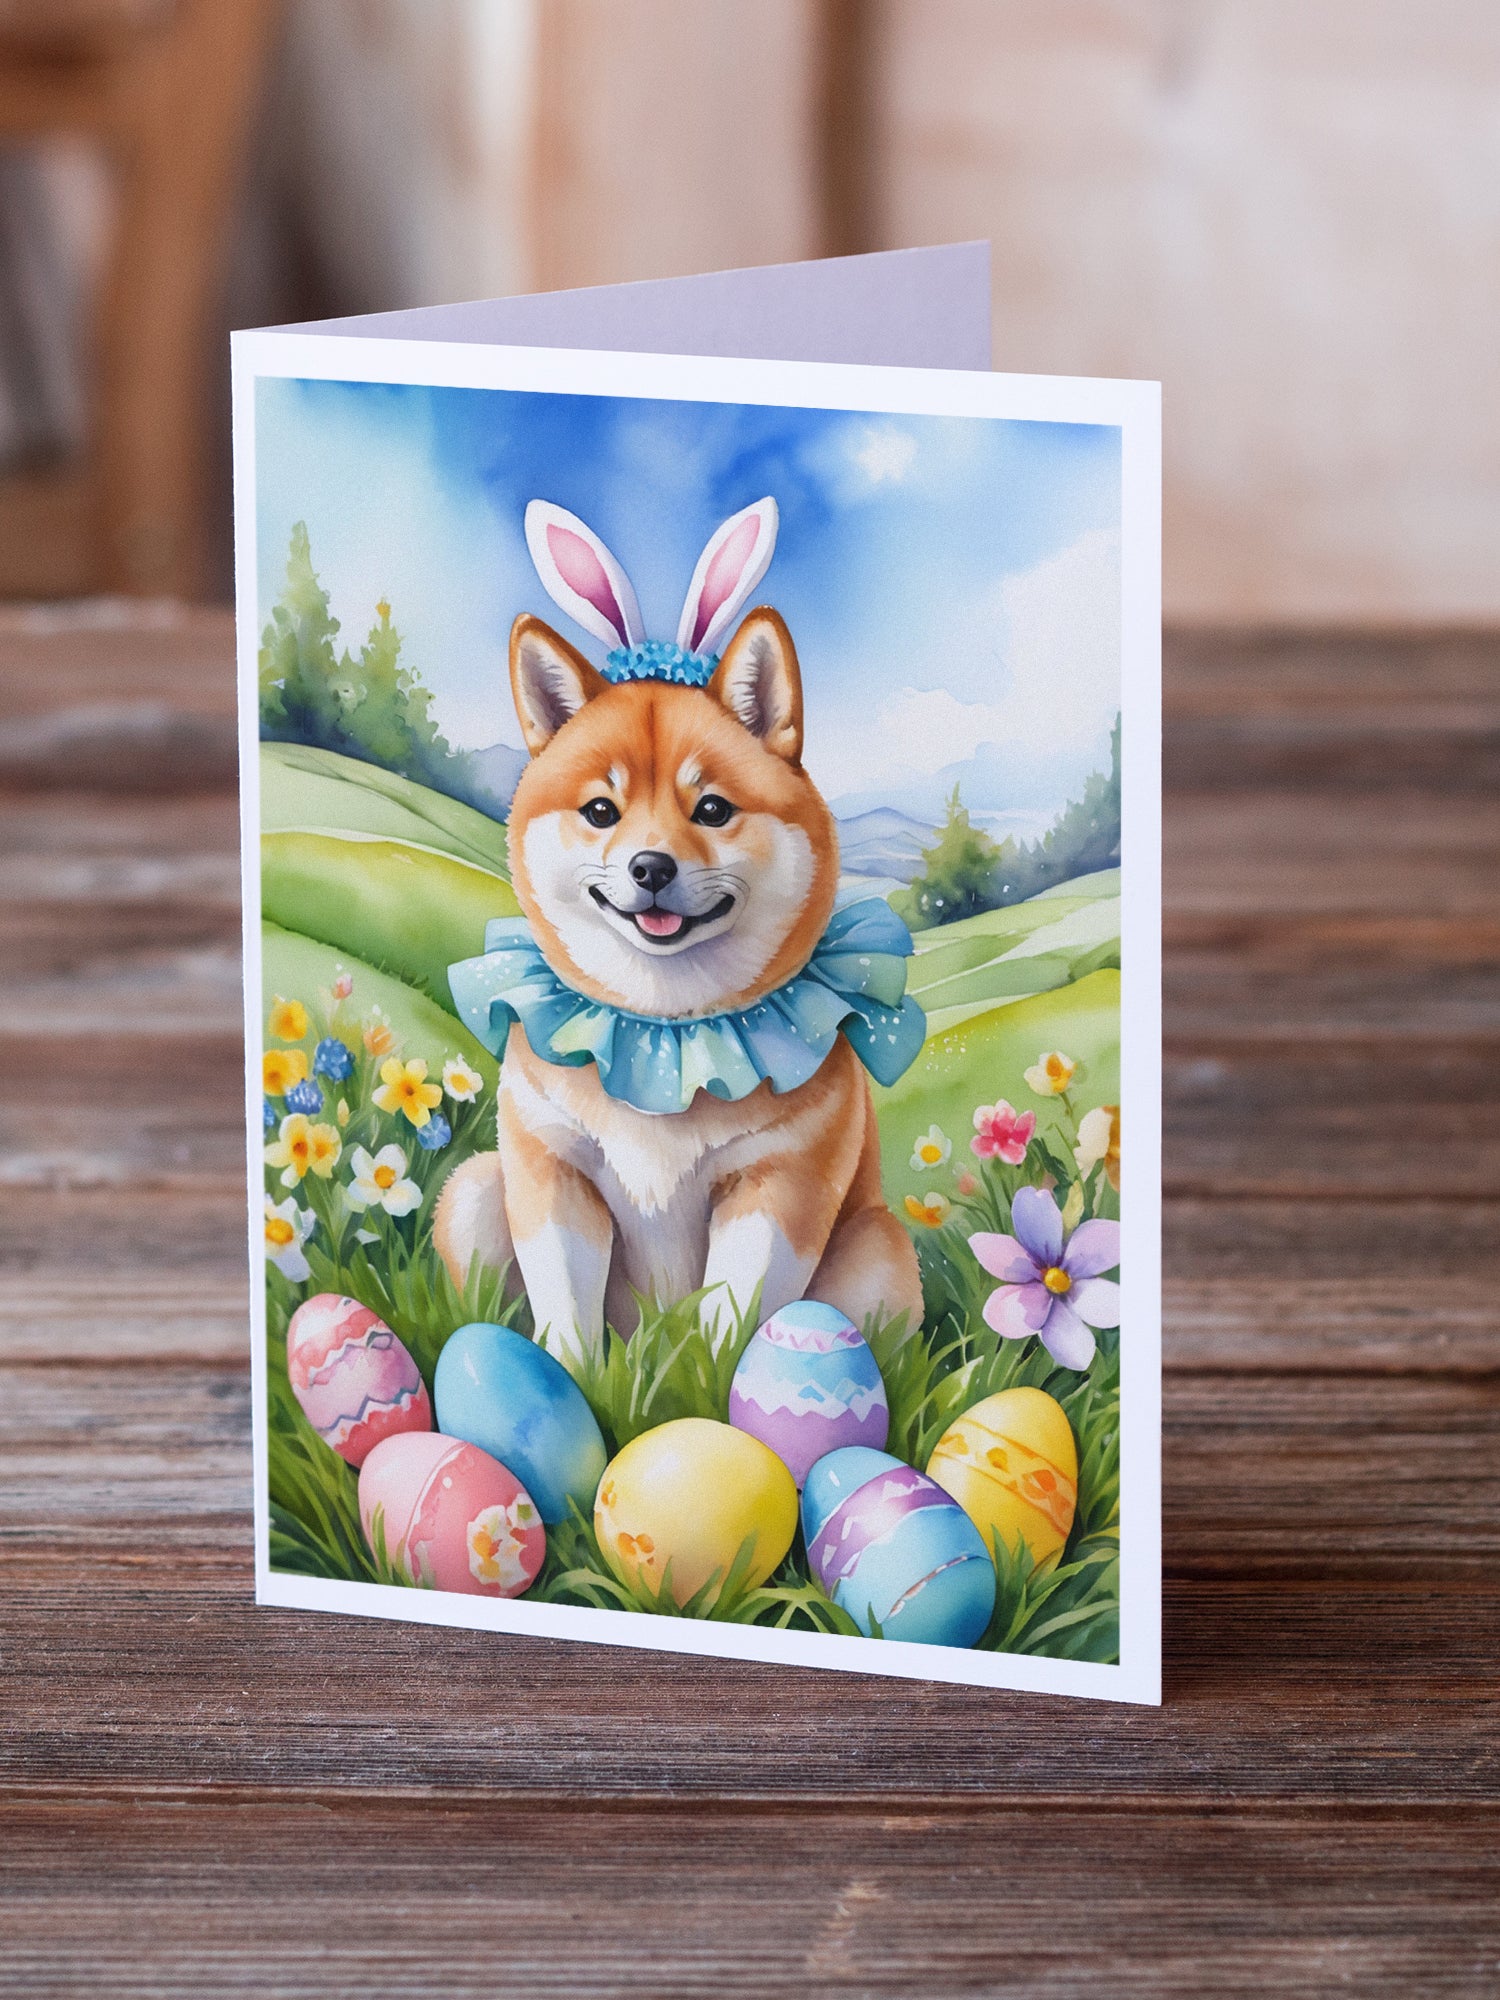 Shiba Inu Easter Egg Hunt Greeting Cards Pack of 8